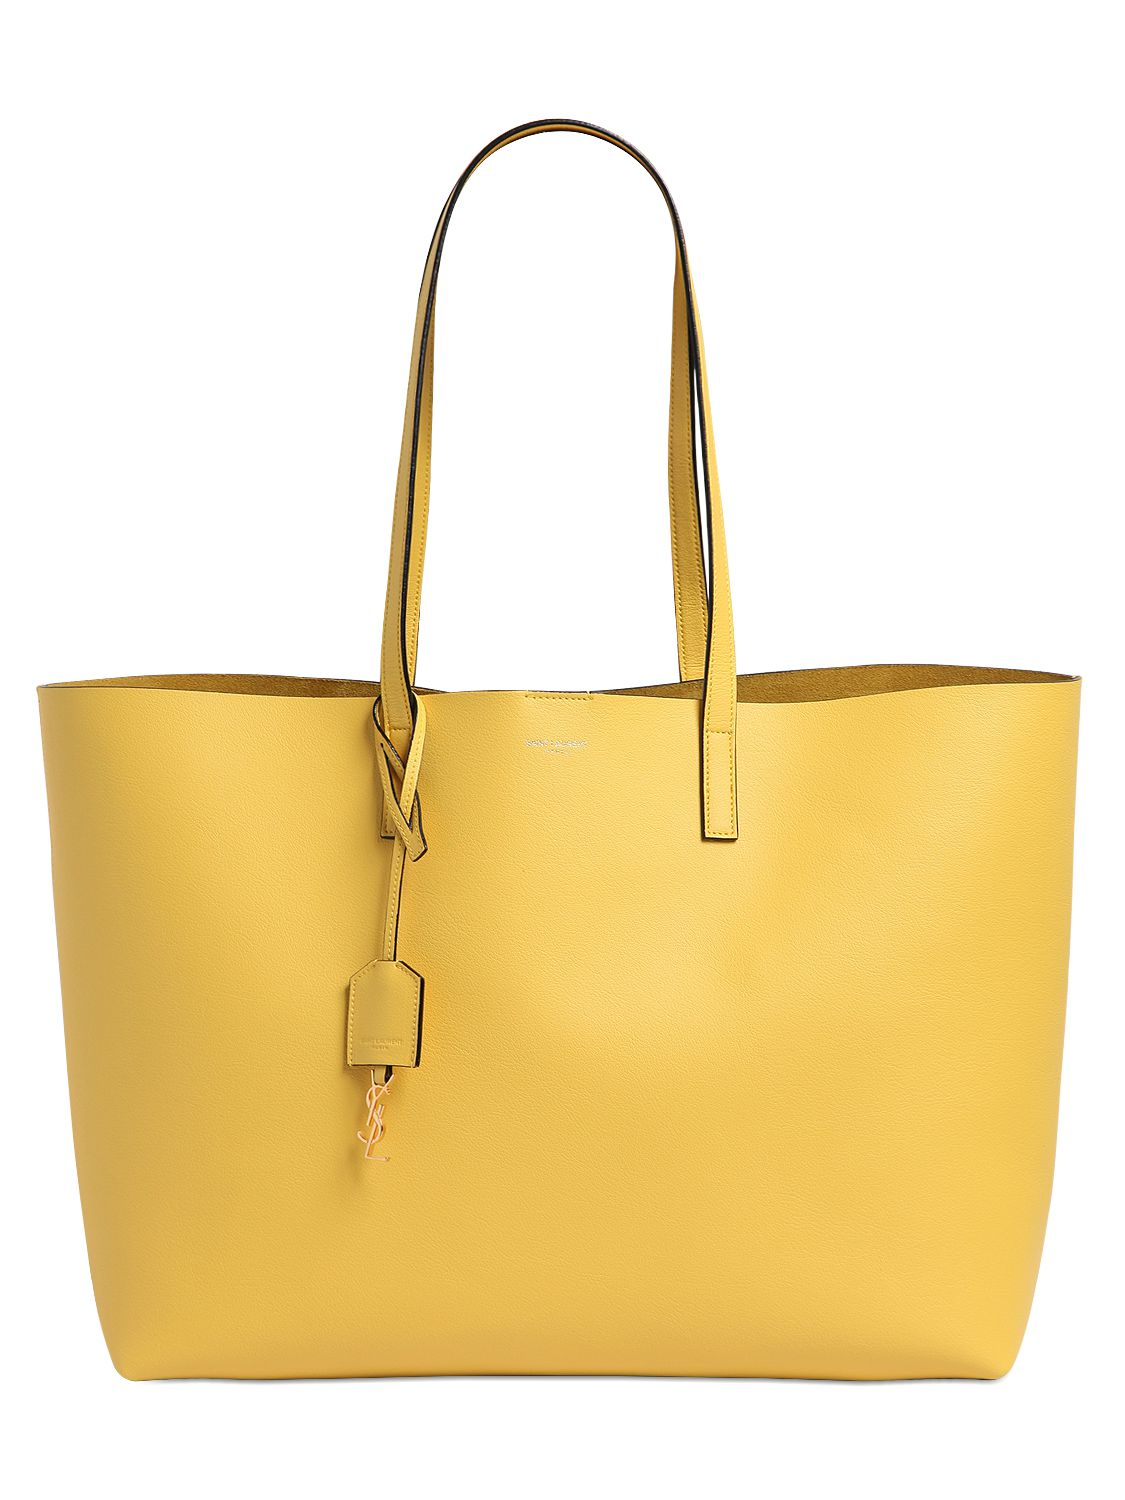 Saint Laurent Soft Leather Tote Bag in Yellow - Lyst